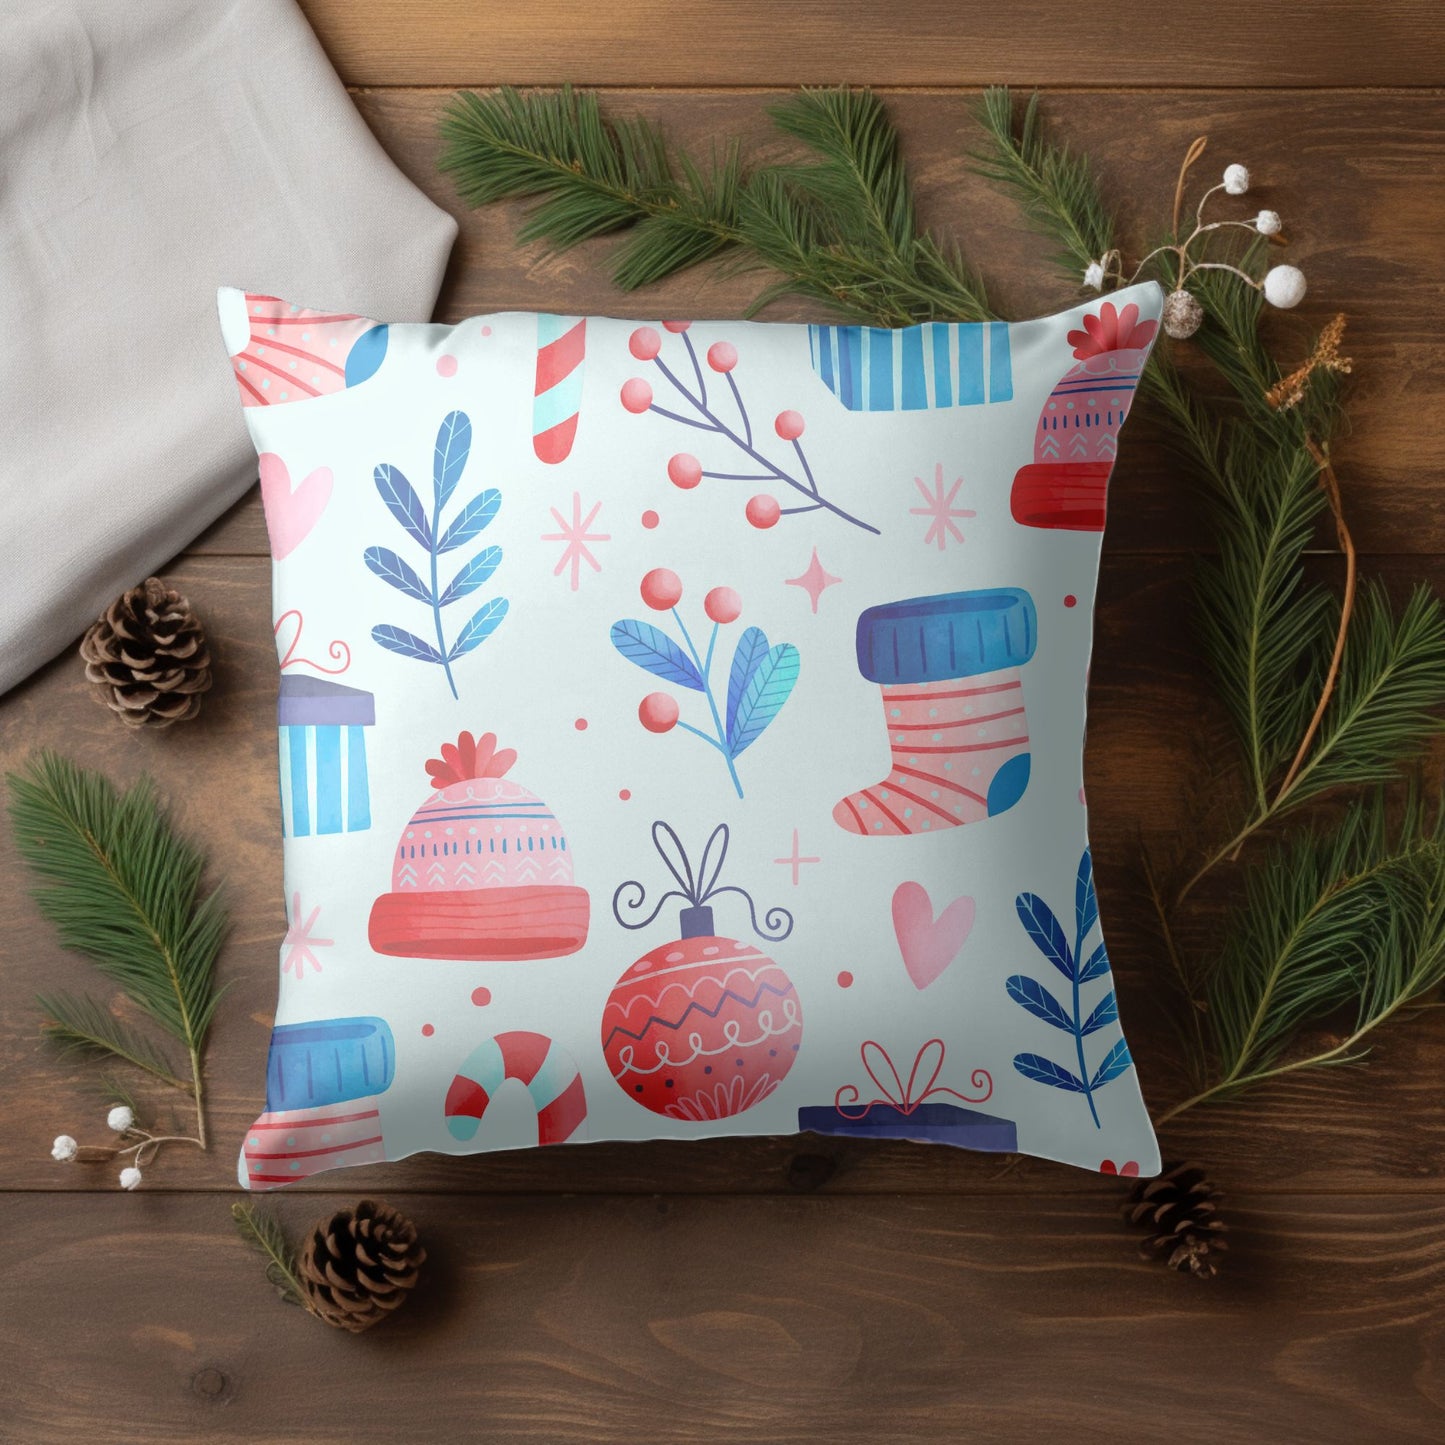 Winter Wonderland Pillow Cover for Holiday Decor